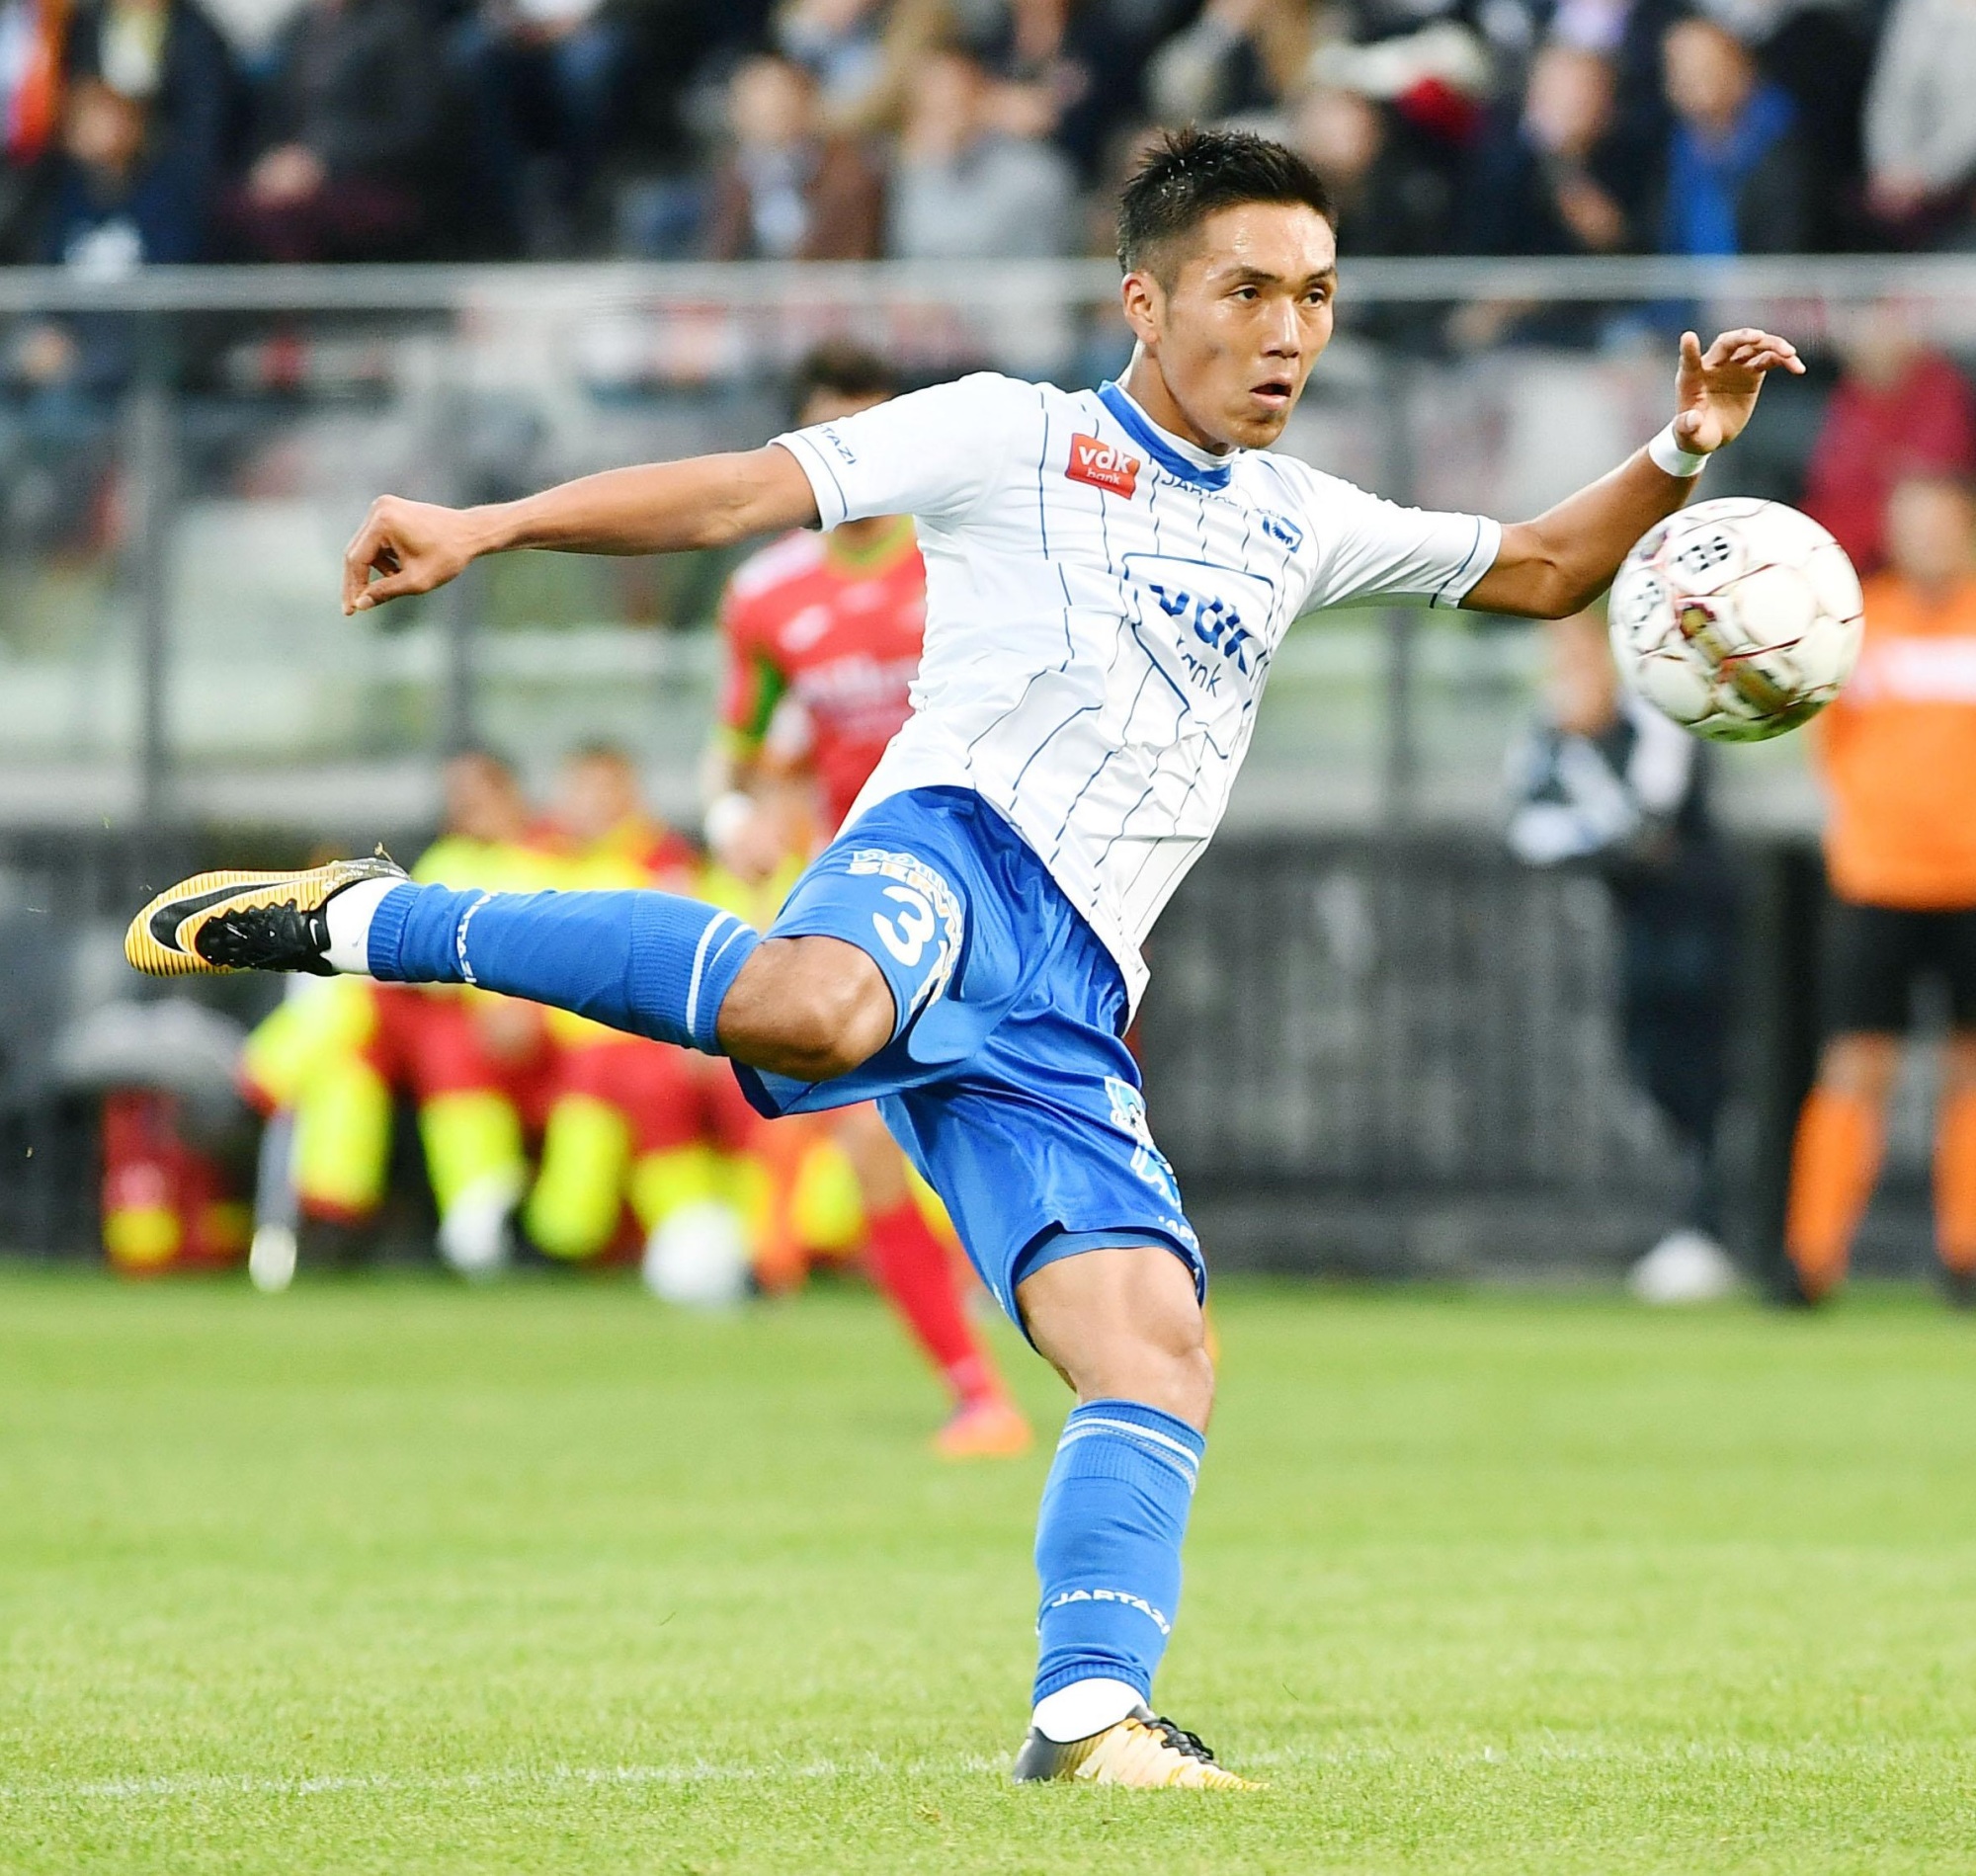 Yuya Kubo shoots during Gent's 2-0 win over Oostende in the Belgian first division on Sunday. | KYODO